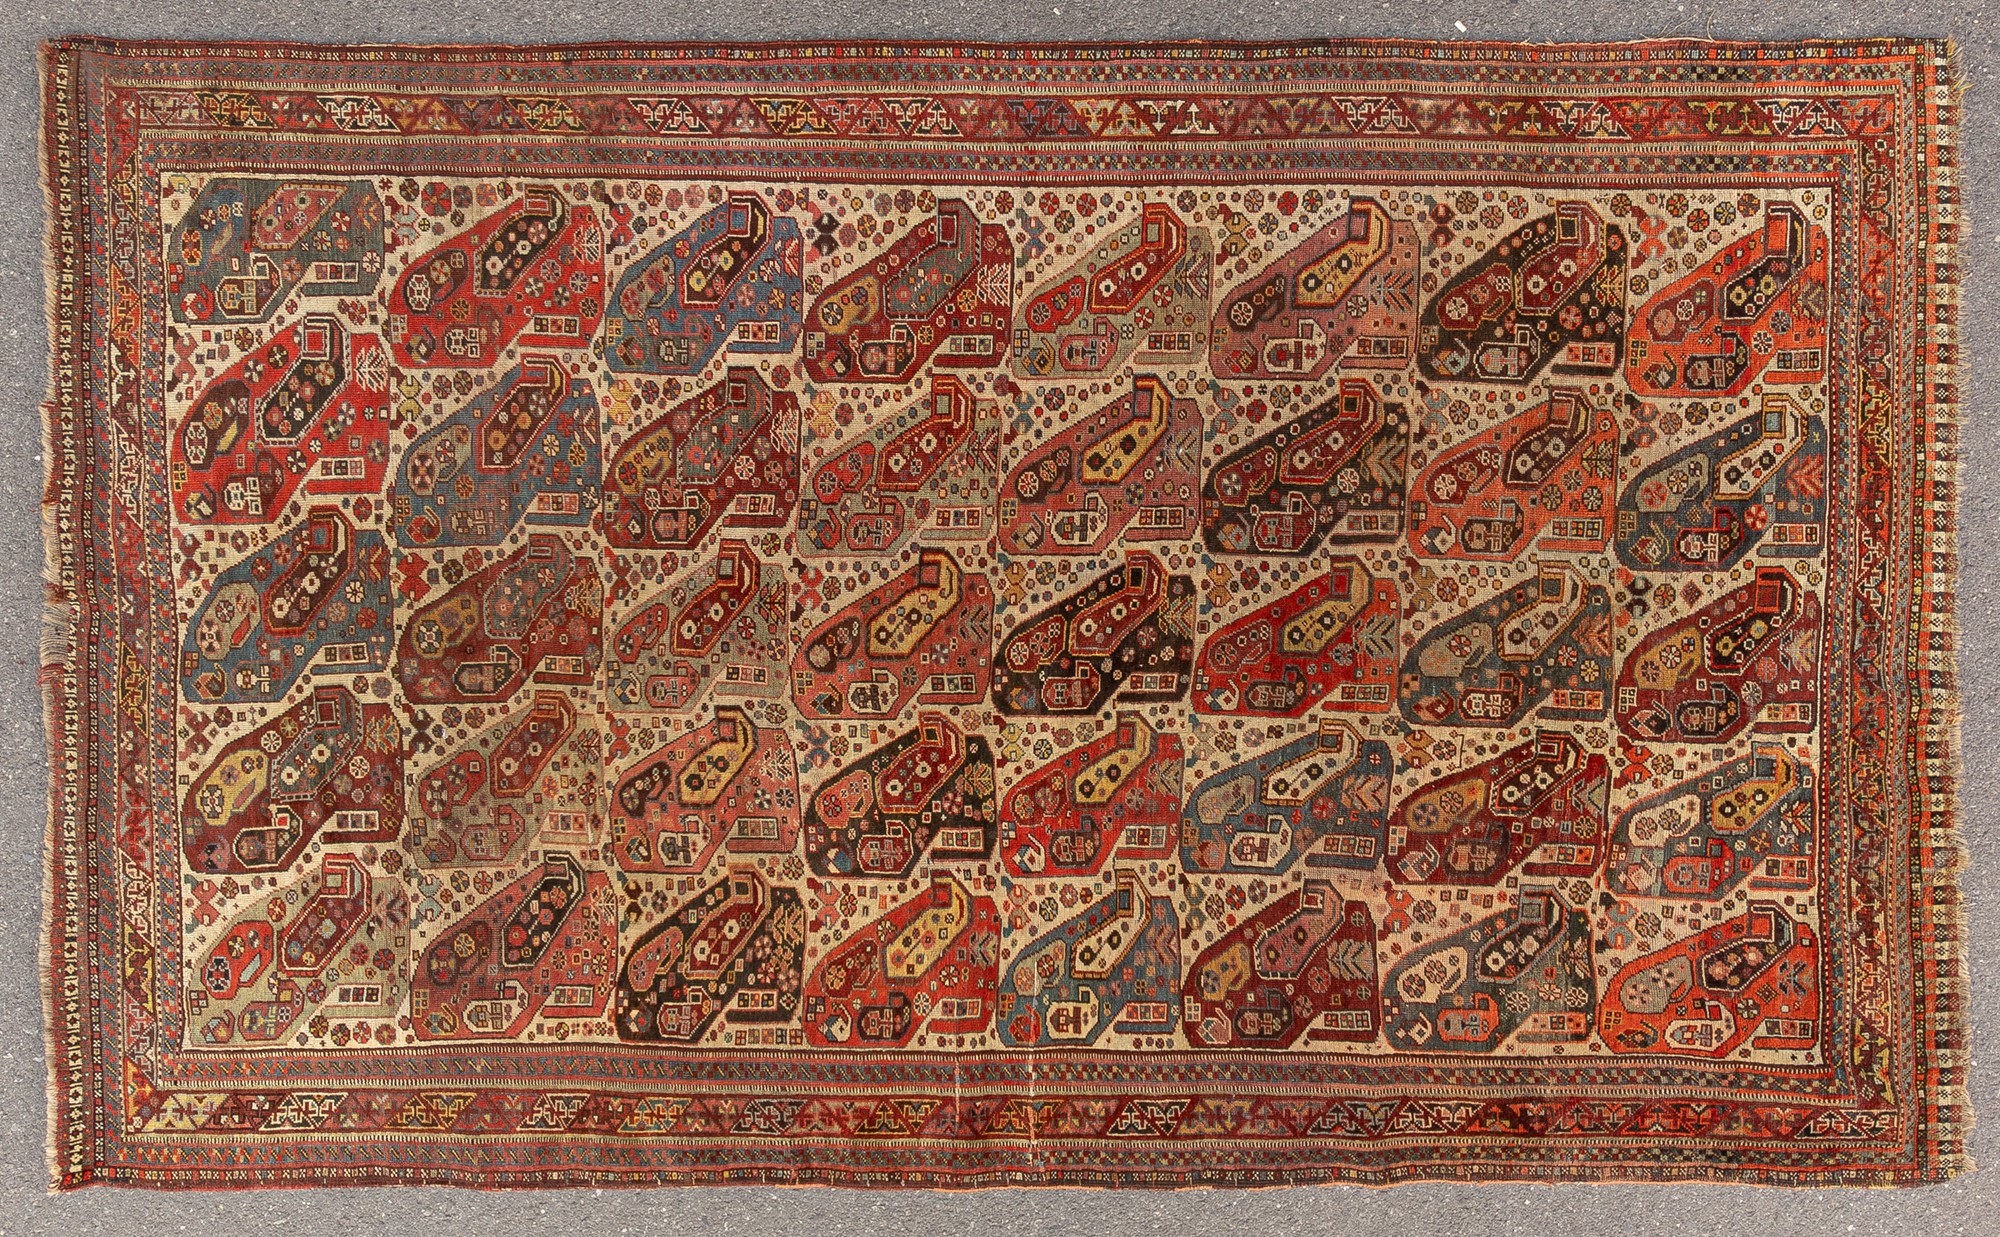 Very fine Persian carpet from the first half of the 20th century